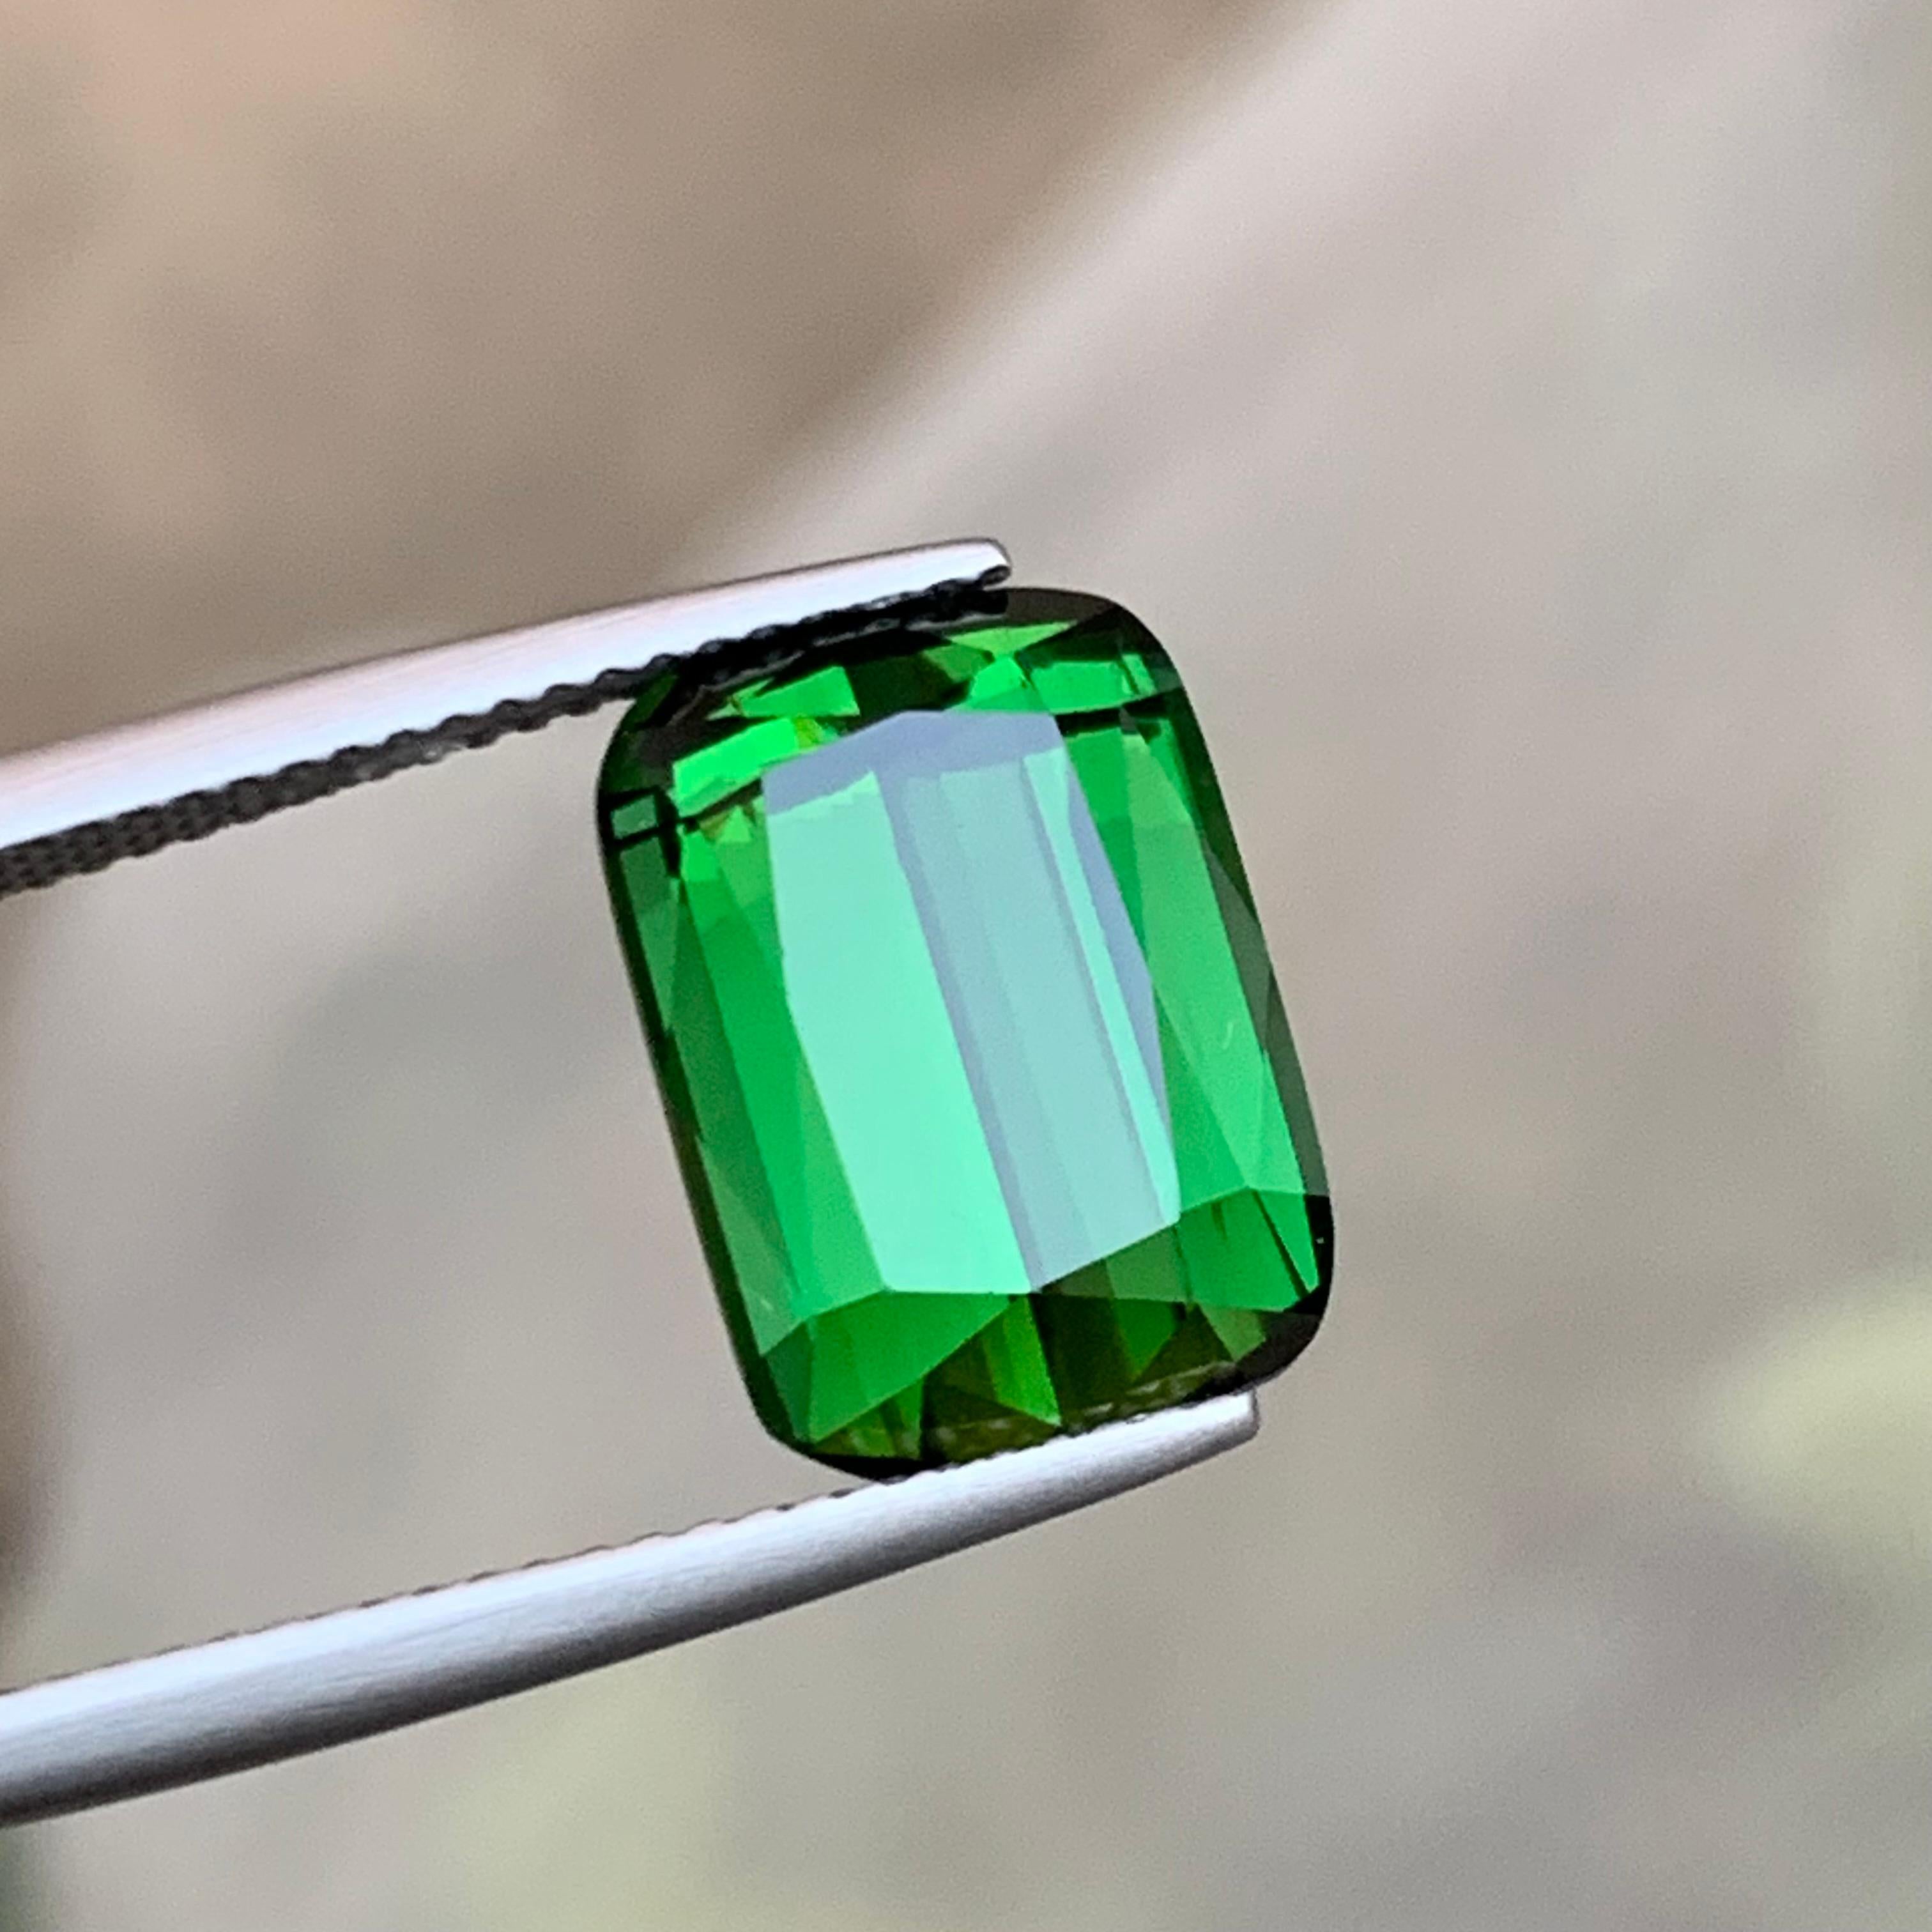 Exquisite 7.75 Carat green natural Tourmaline gemstone, sourced from the rare Kunar mines of Afghanistan. Its lustrous green hue captivates, and the step cushion cut enhances its beauty. Perfect for an elegant ring setting, this gem is a timeless